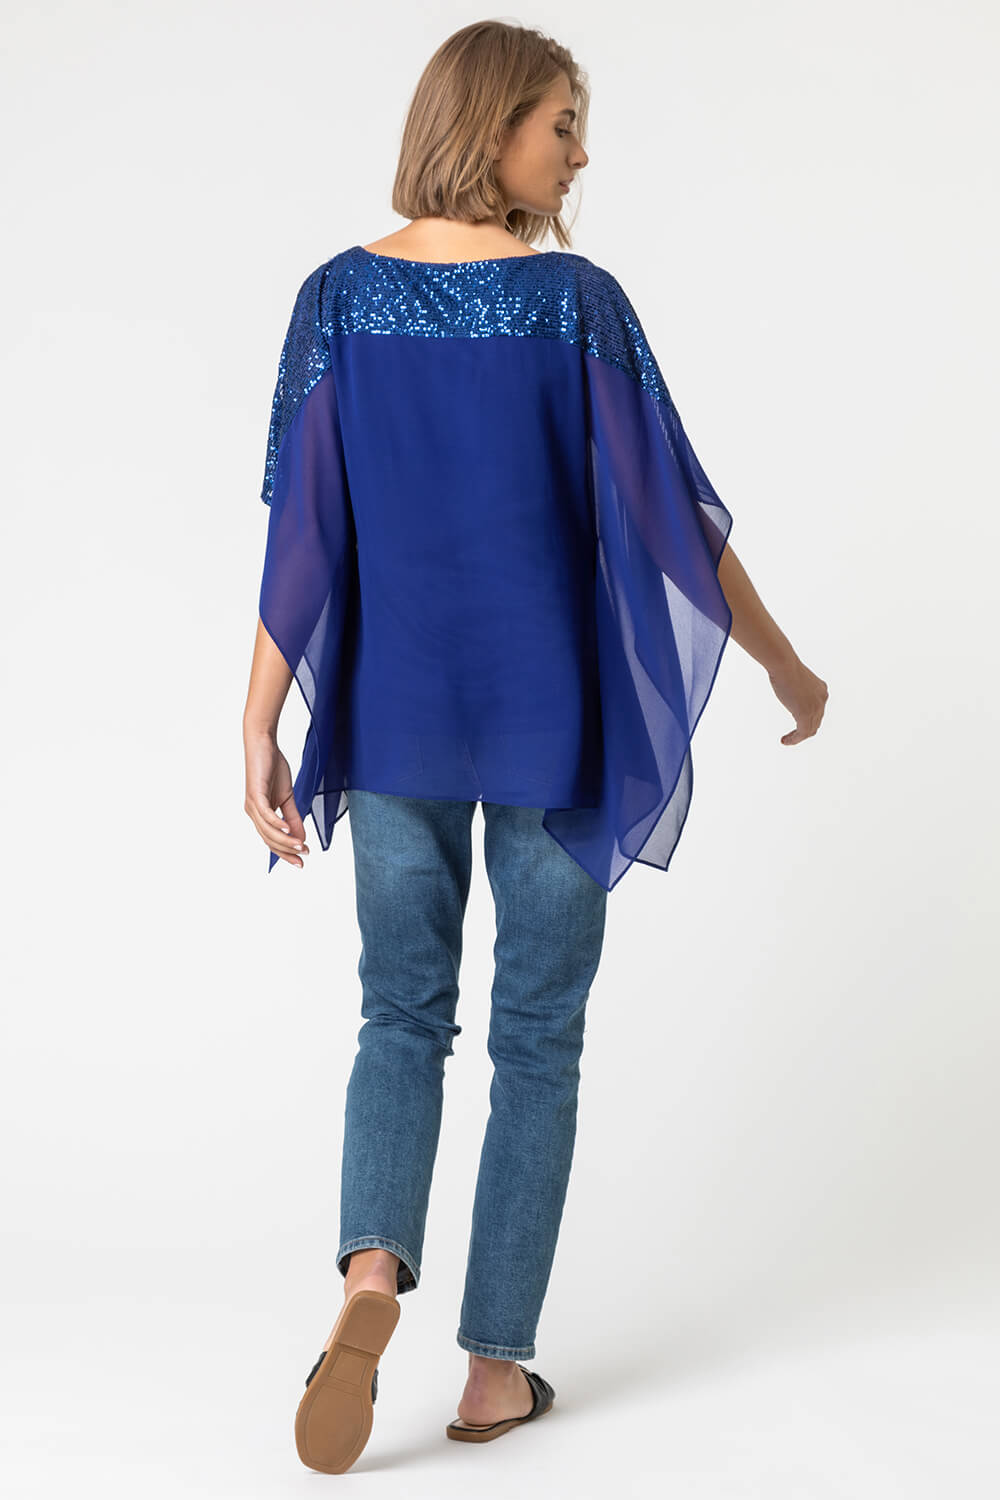 Royal Blue Sequin Embellished Chiffon Overlay Top, Image 2 of 4